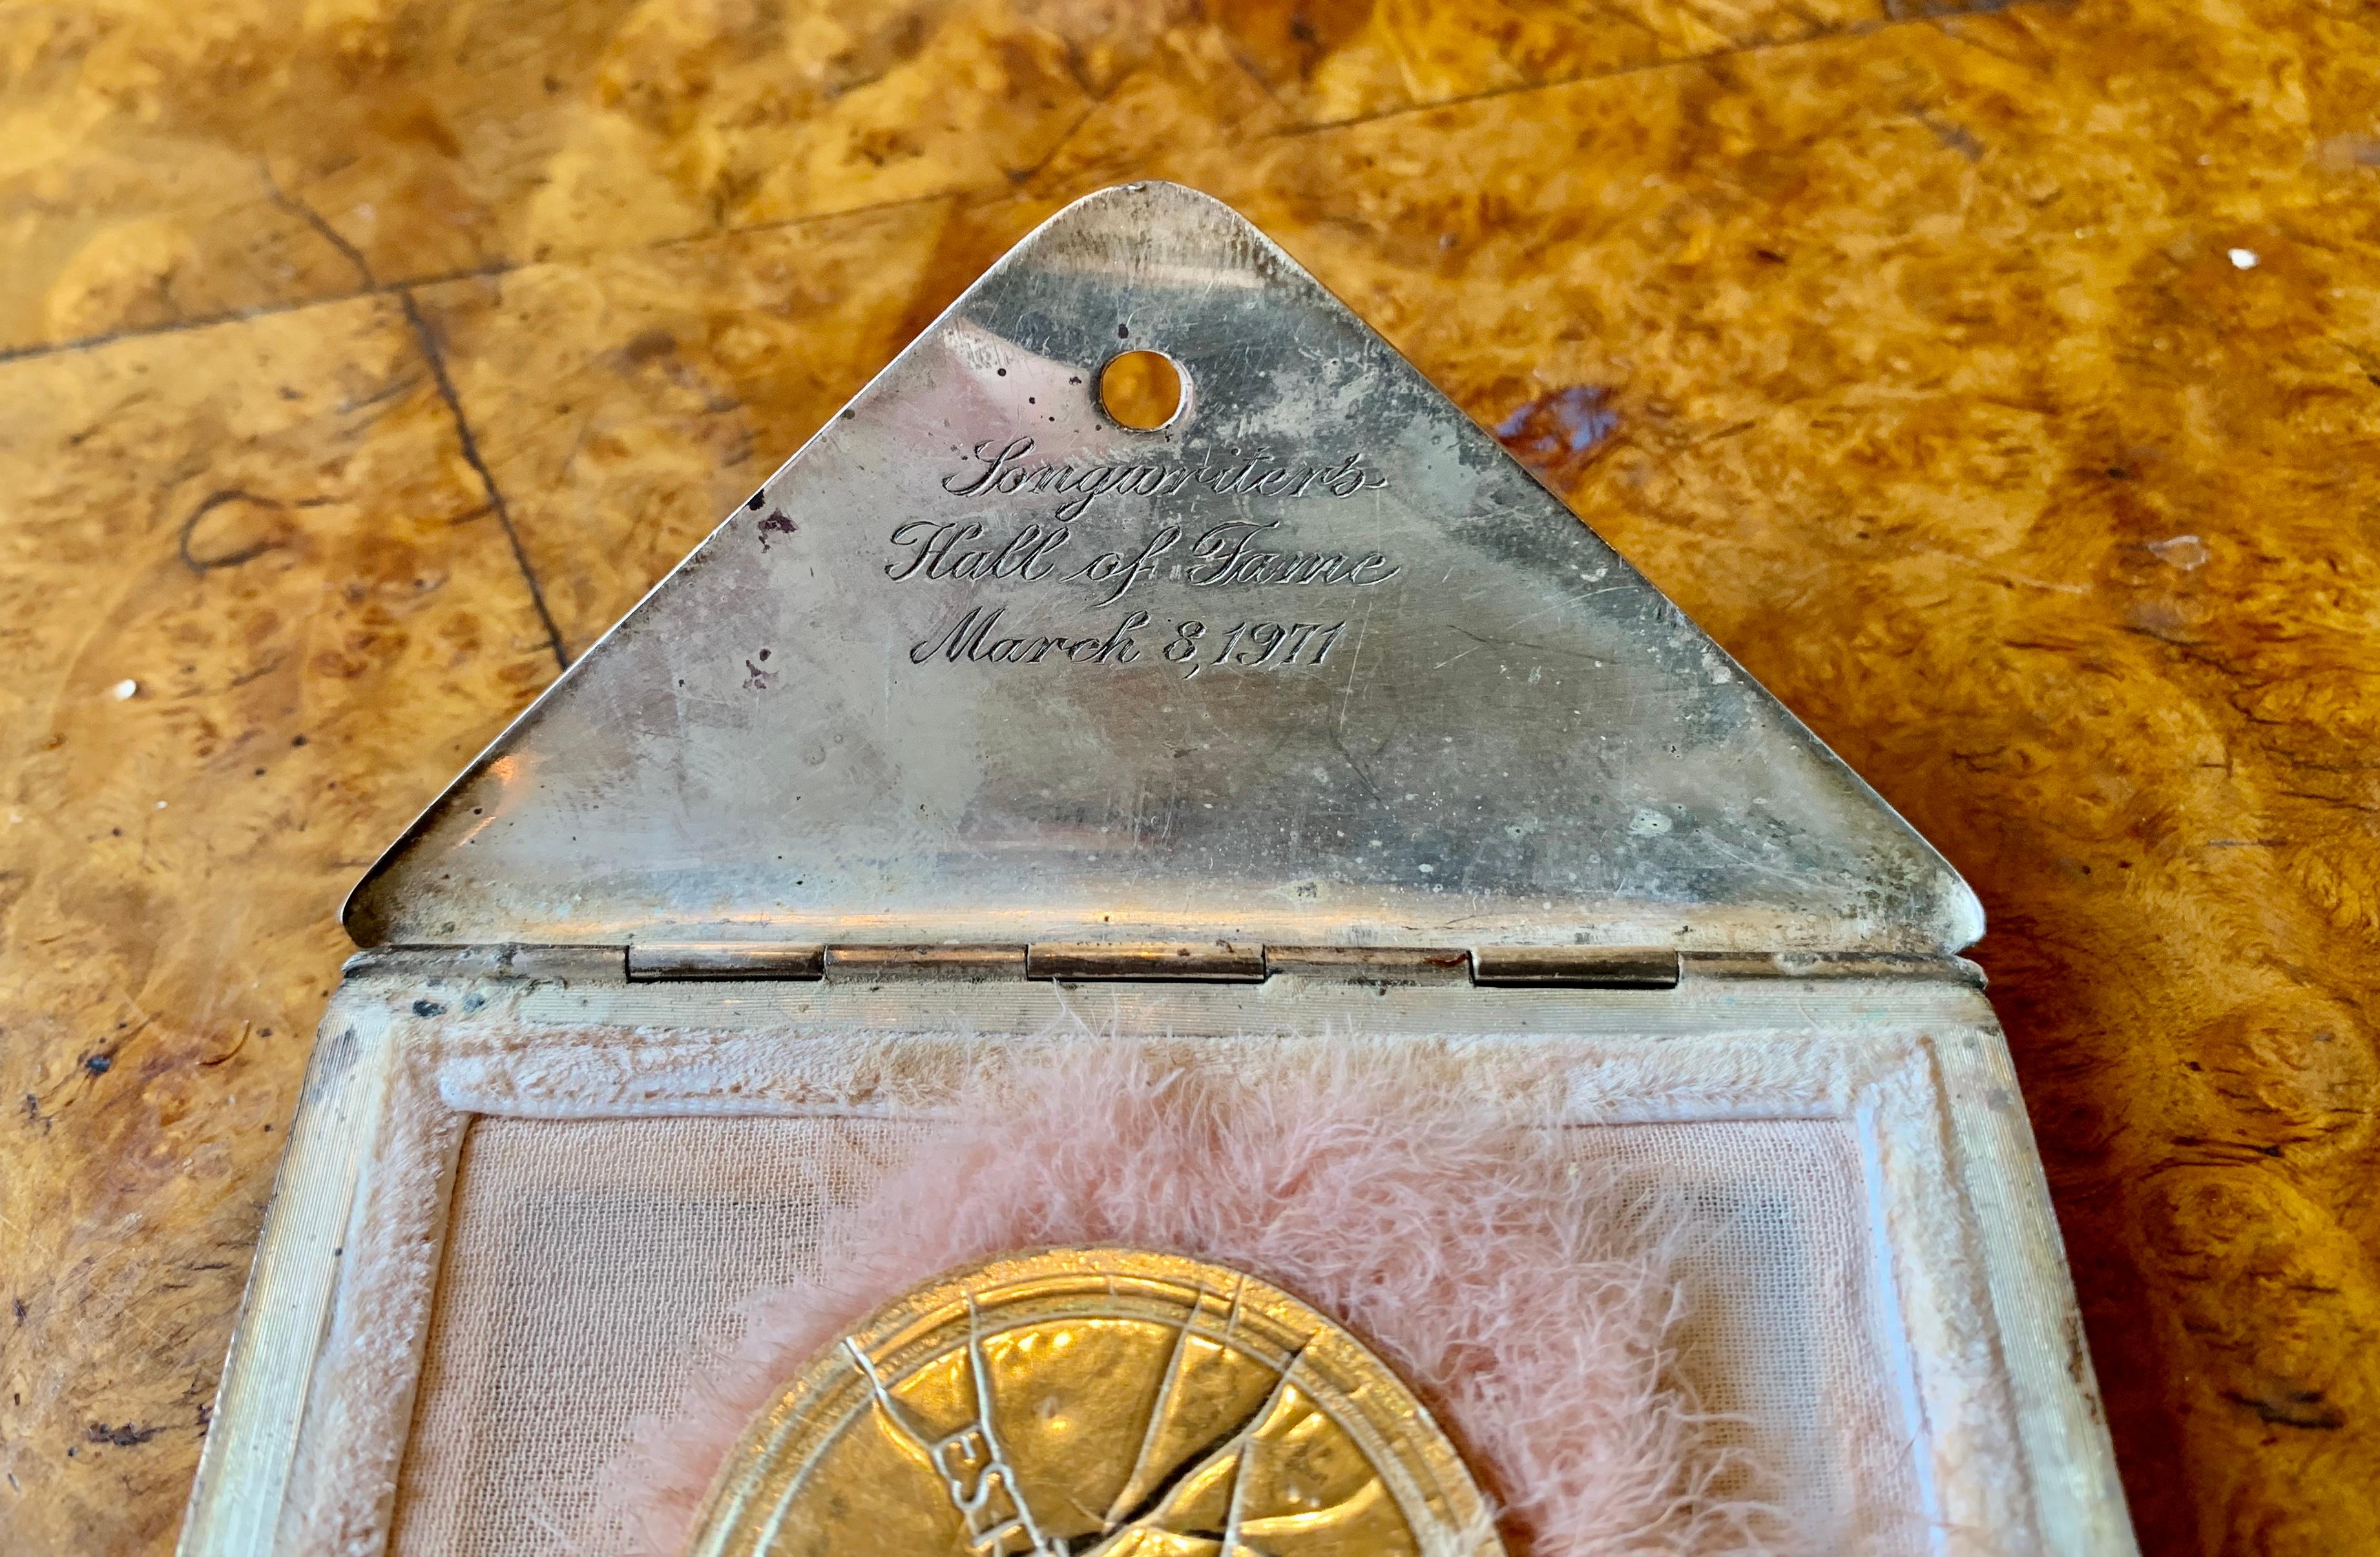 We are thrilled to offer the Tiffany & Co. Silver Envelope Compact belonging to legendary Oscar Winning actress CELESTE HOLM which was given to her and inscribed by the Songwriter's Hall of Fame.
The stylized envelope is of brushed silver, opening